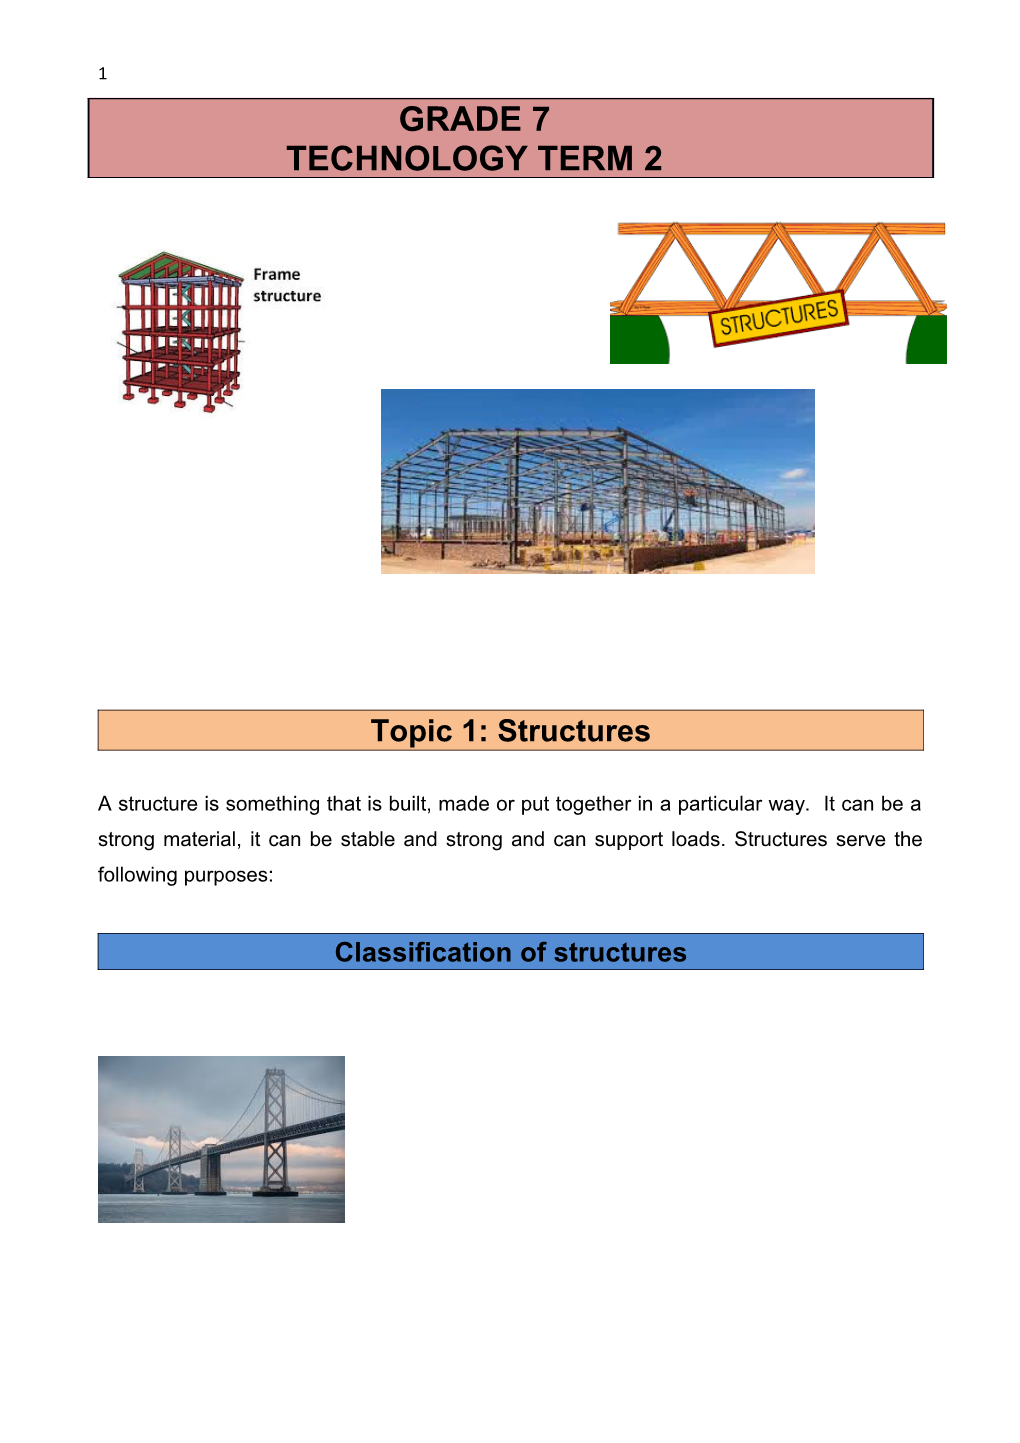 Topic 1: Structures